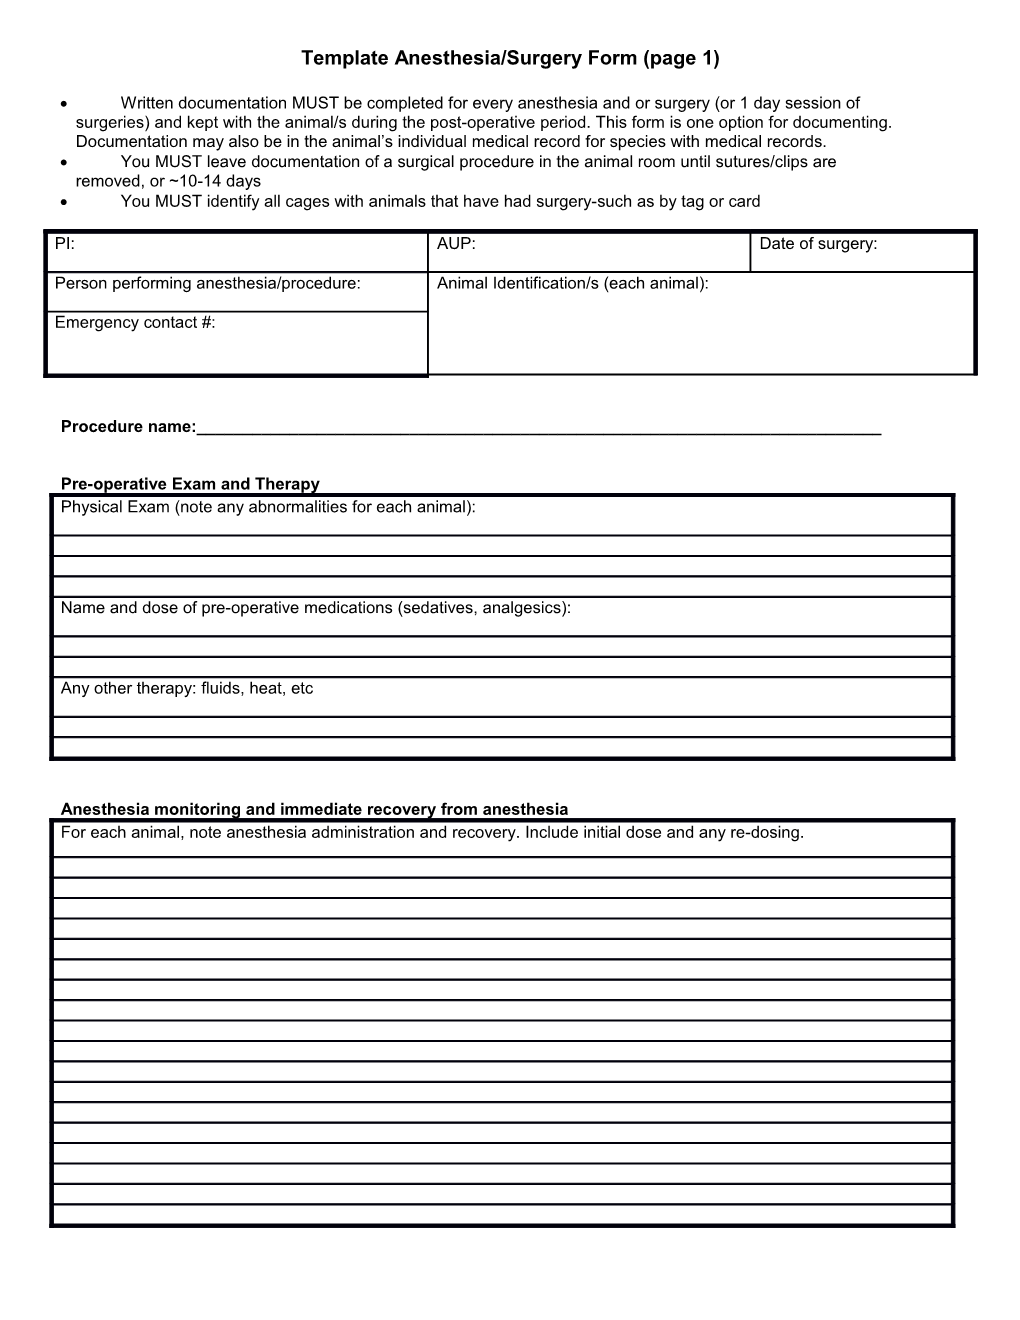 Template Anesthesia/Surgery Form (Page 1)